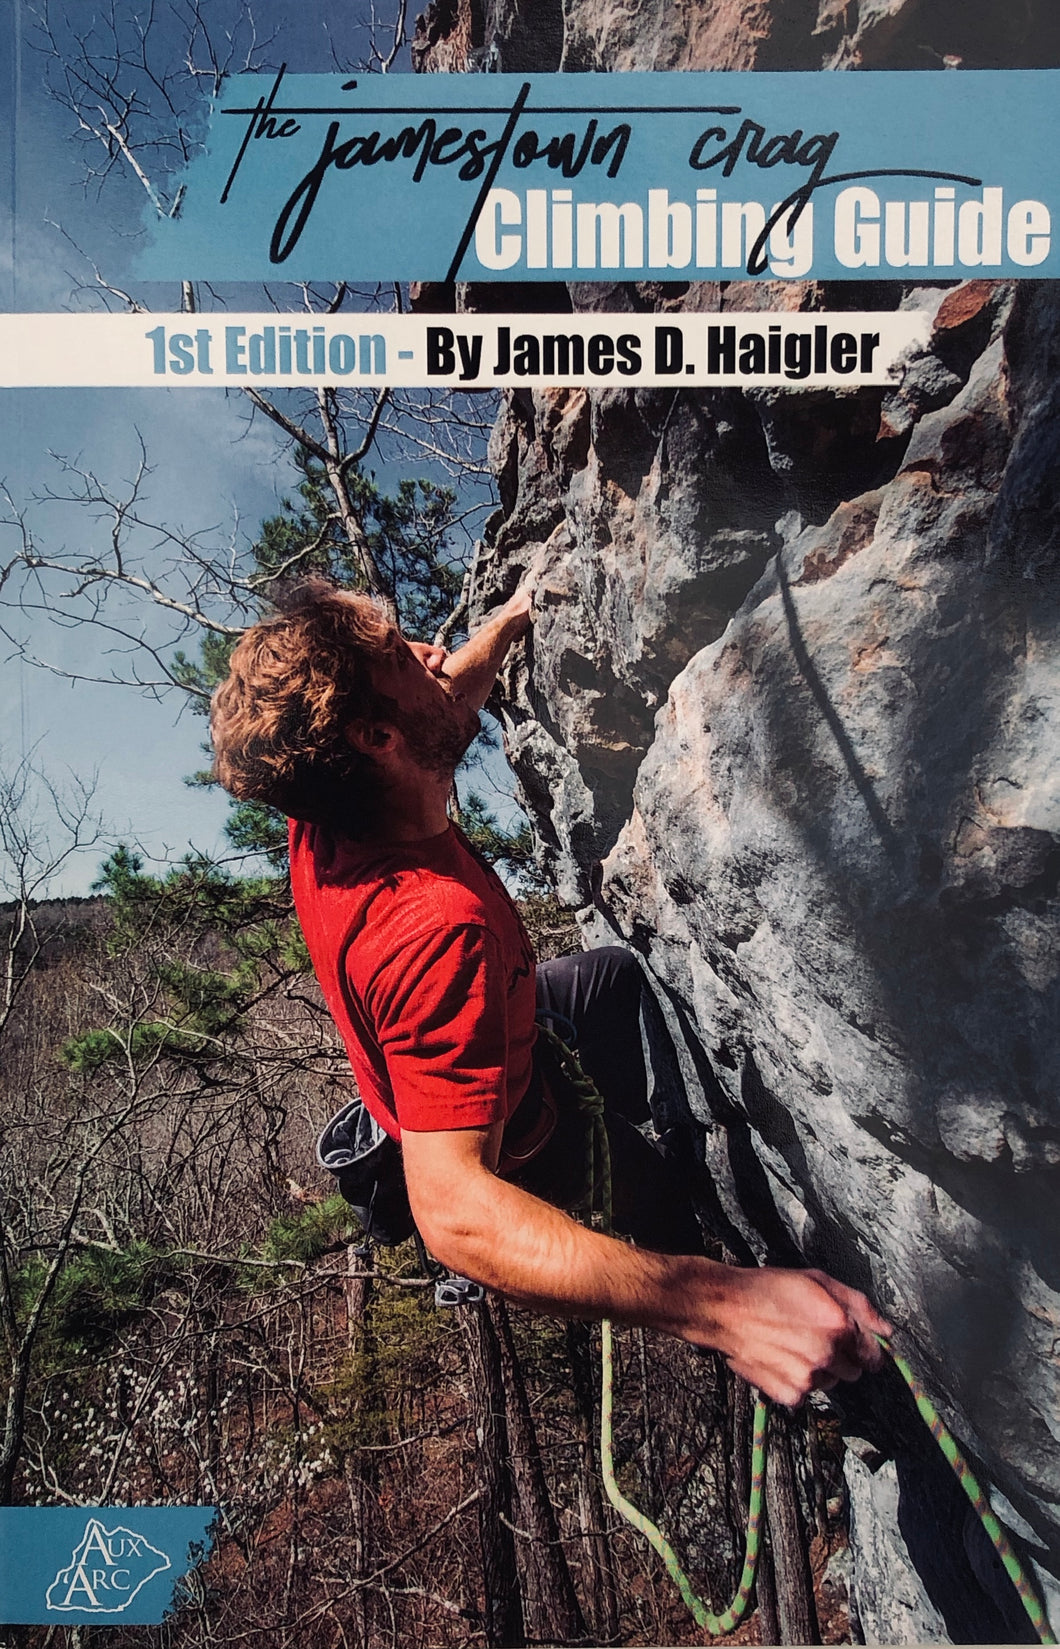 The Jamestown Crag 1st Edition - Guide Book